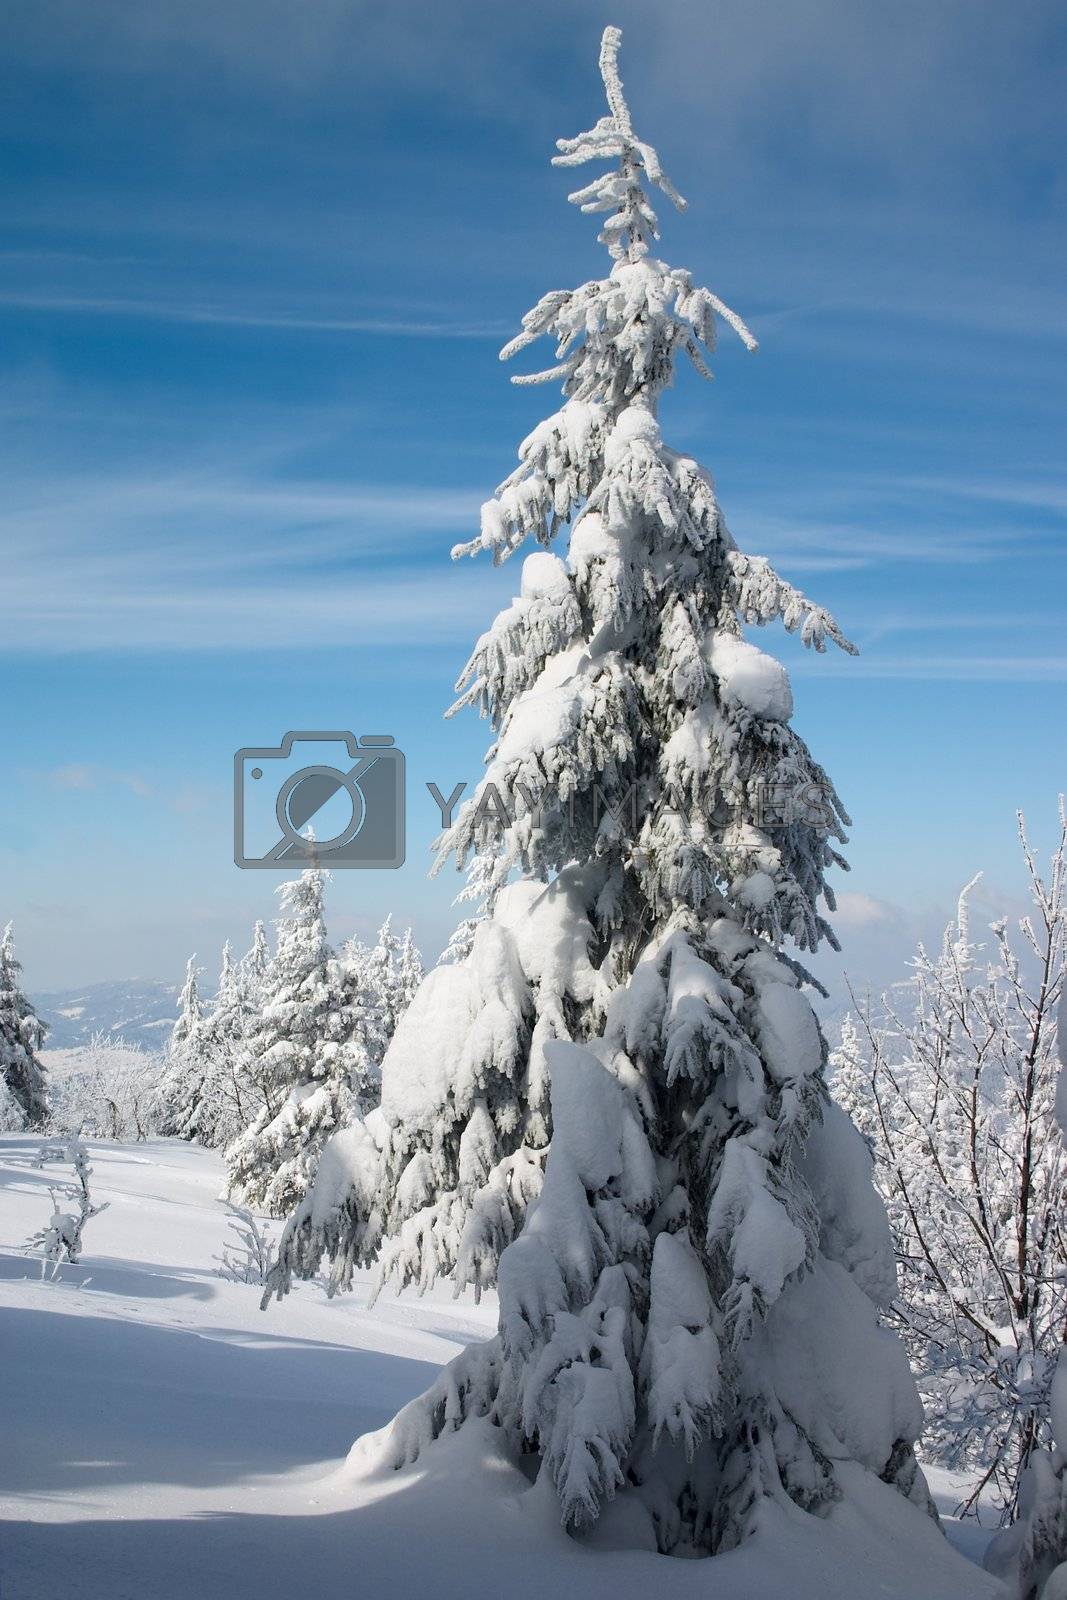 Royalty free image of snowy fir tree in winter mountains by Ukrainian